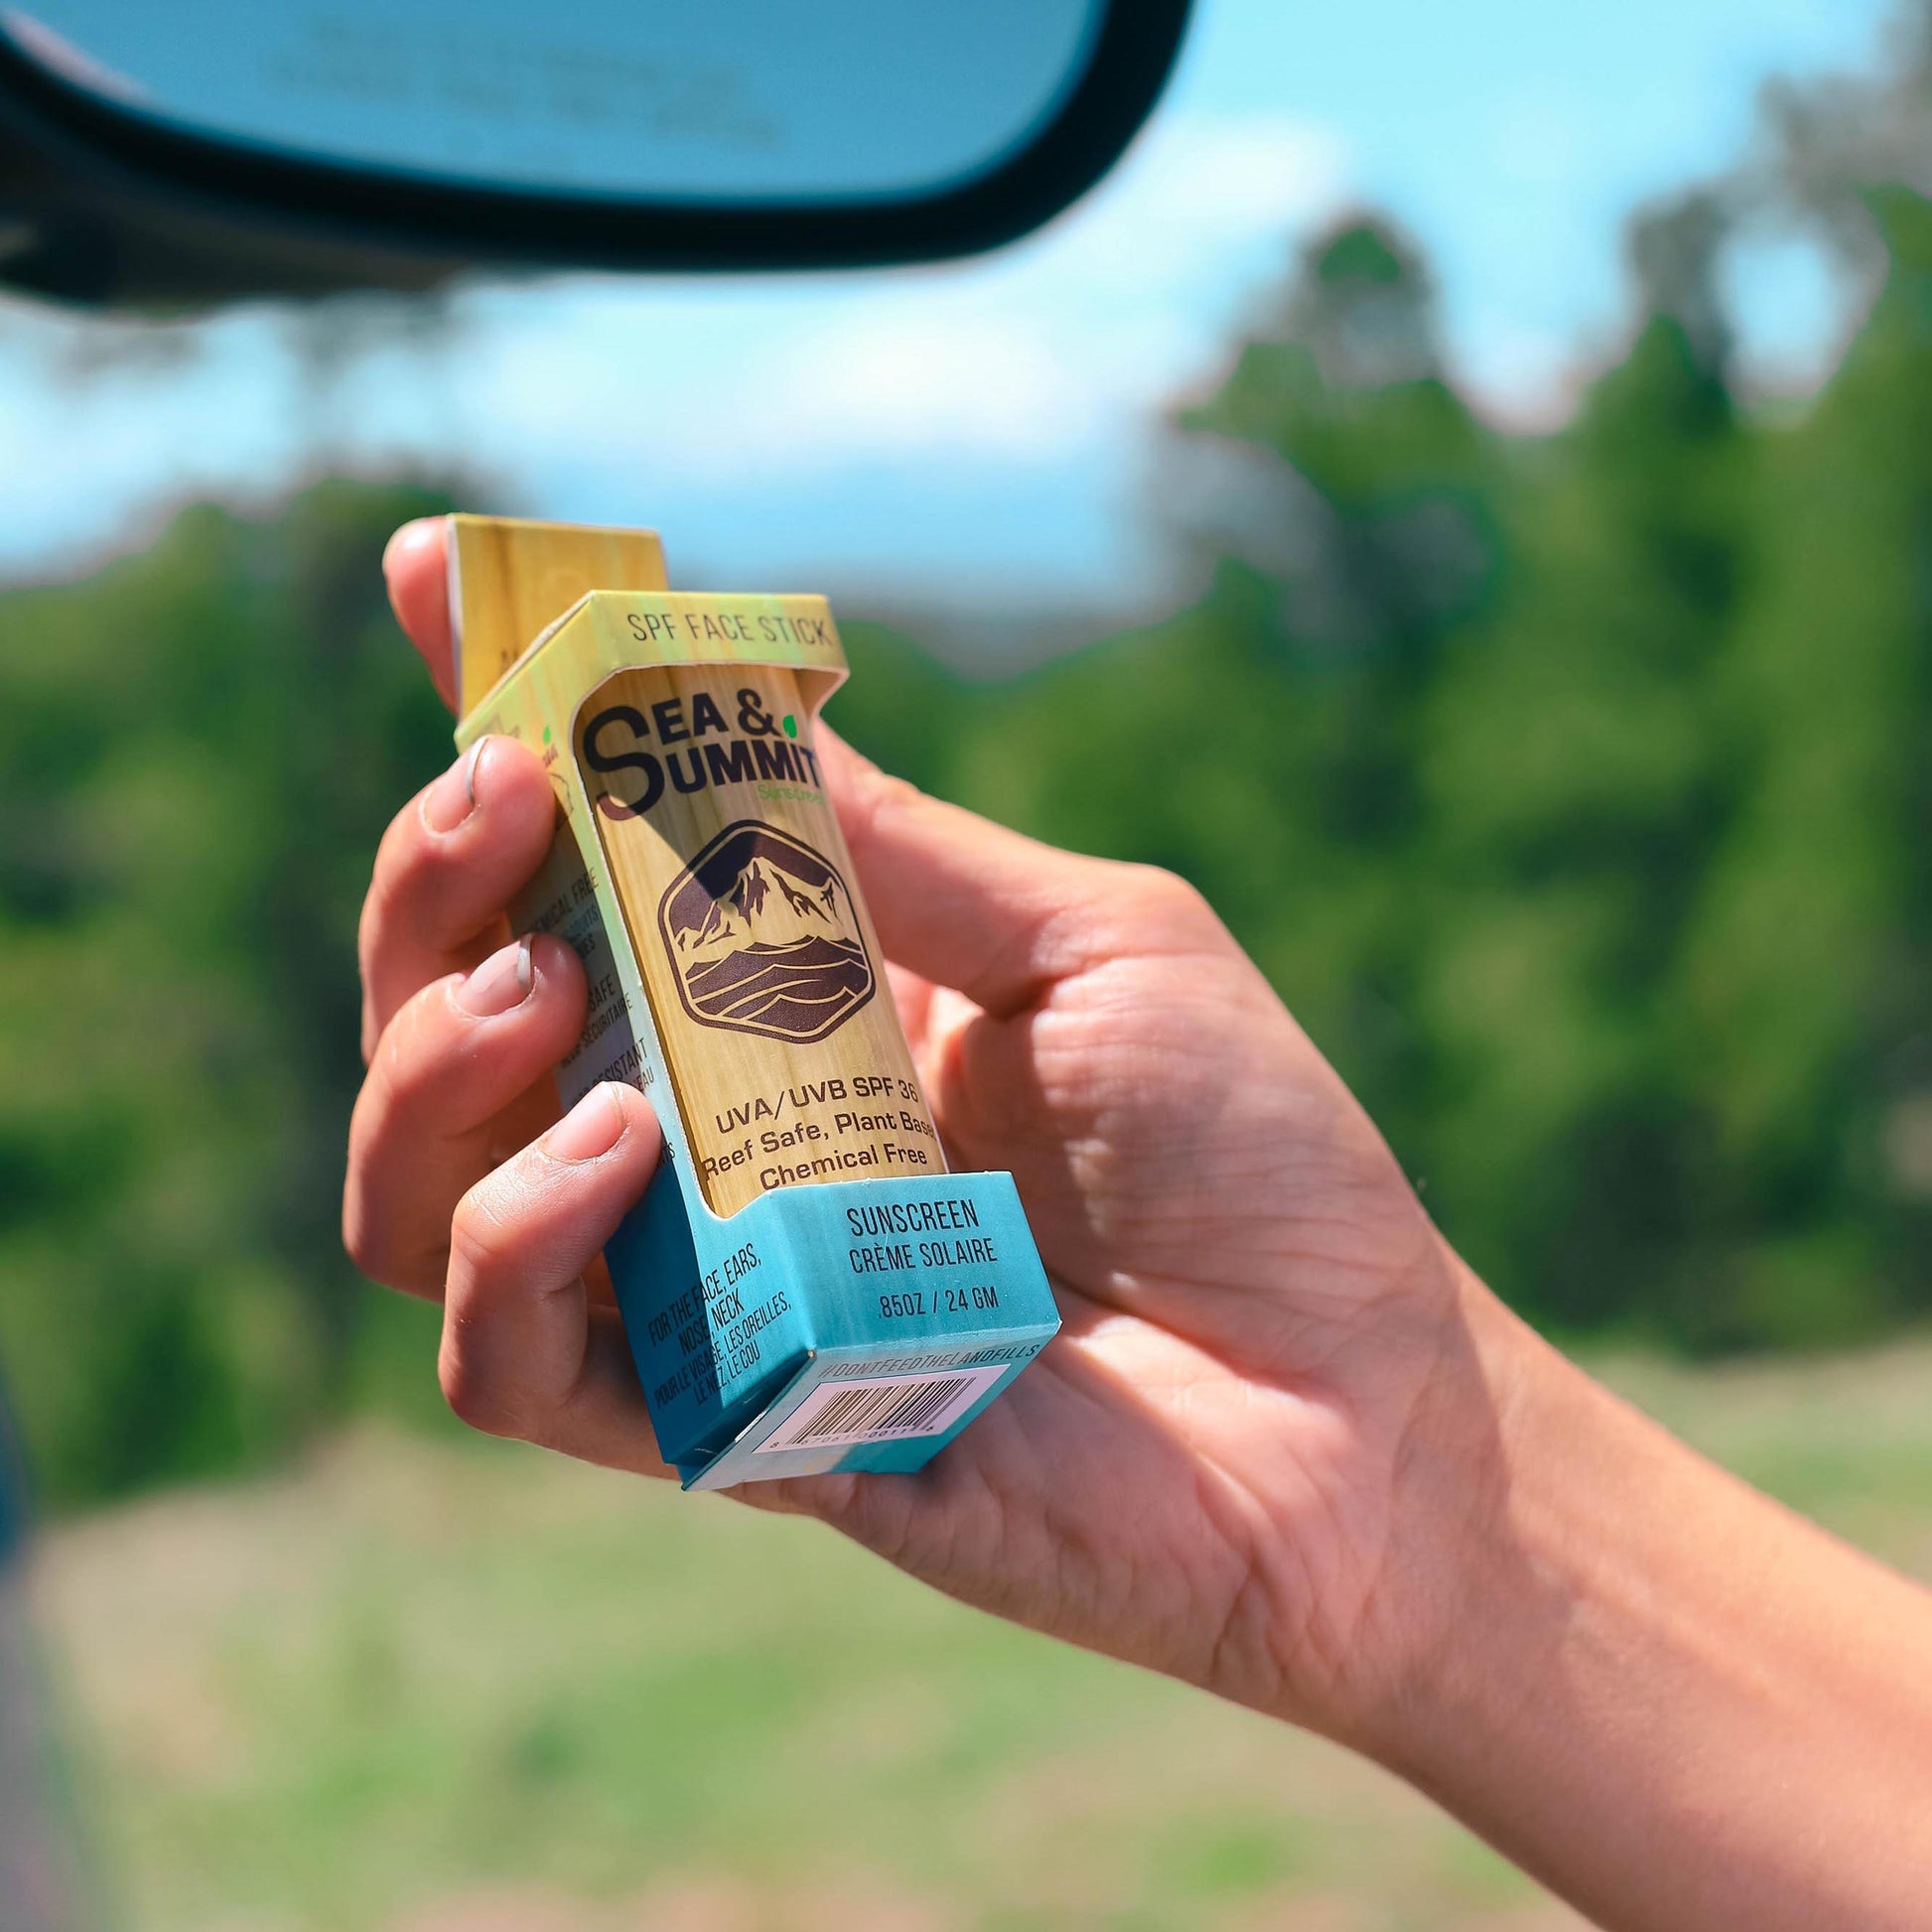 Dalton holding up the full SPF 36 face stick in its recyclable packaging on one of his summer road trips.